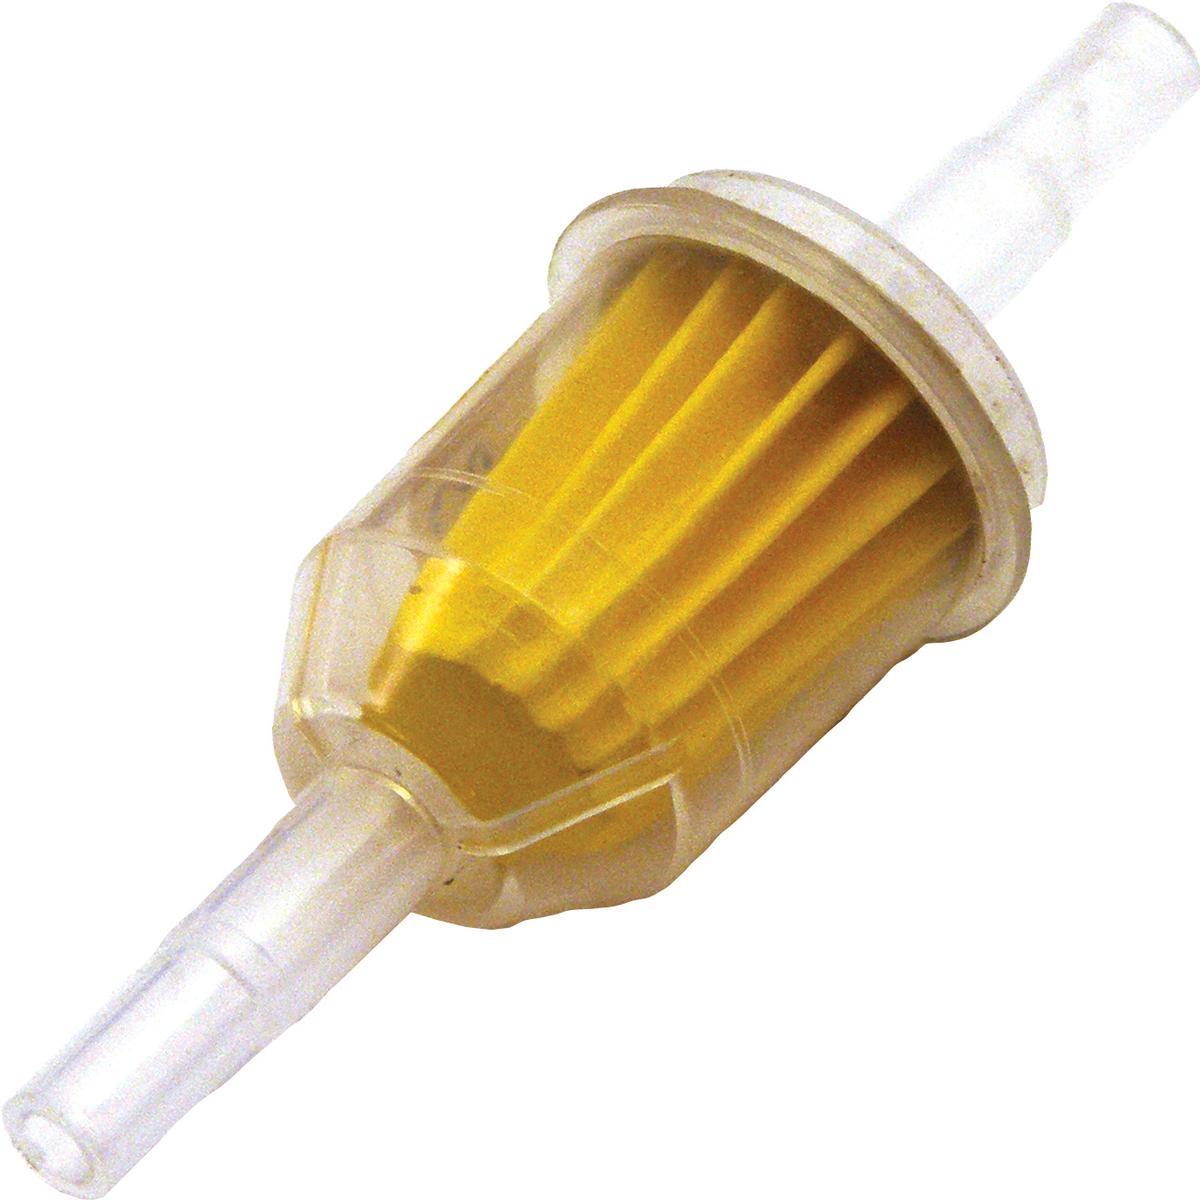 Universal Fuel Filter for 5/16 to 3/8 line